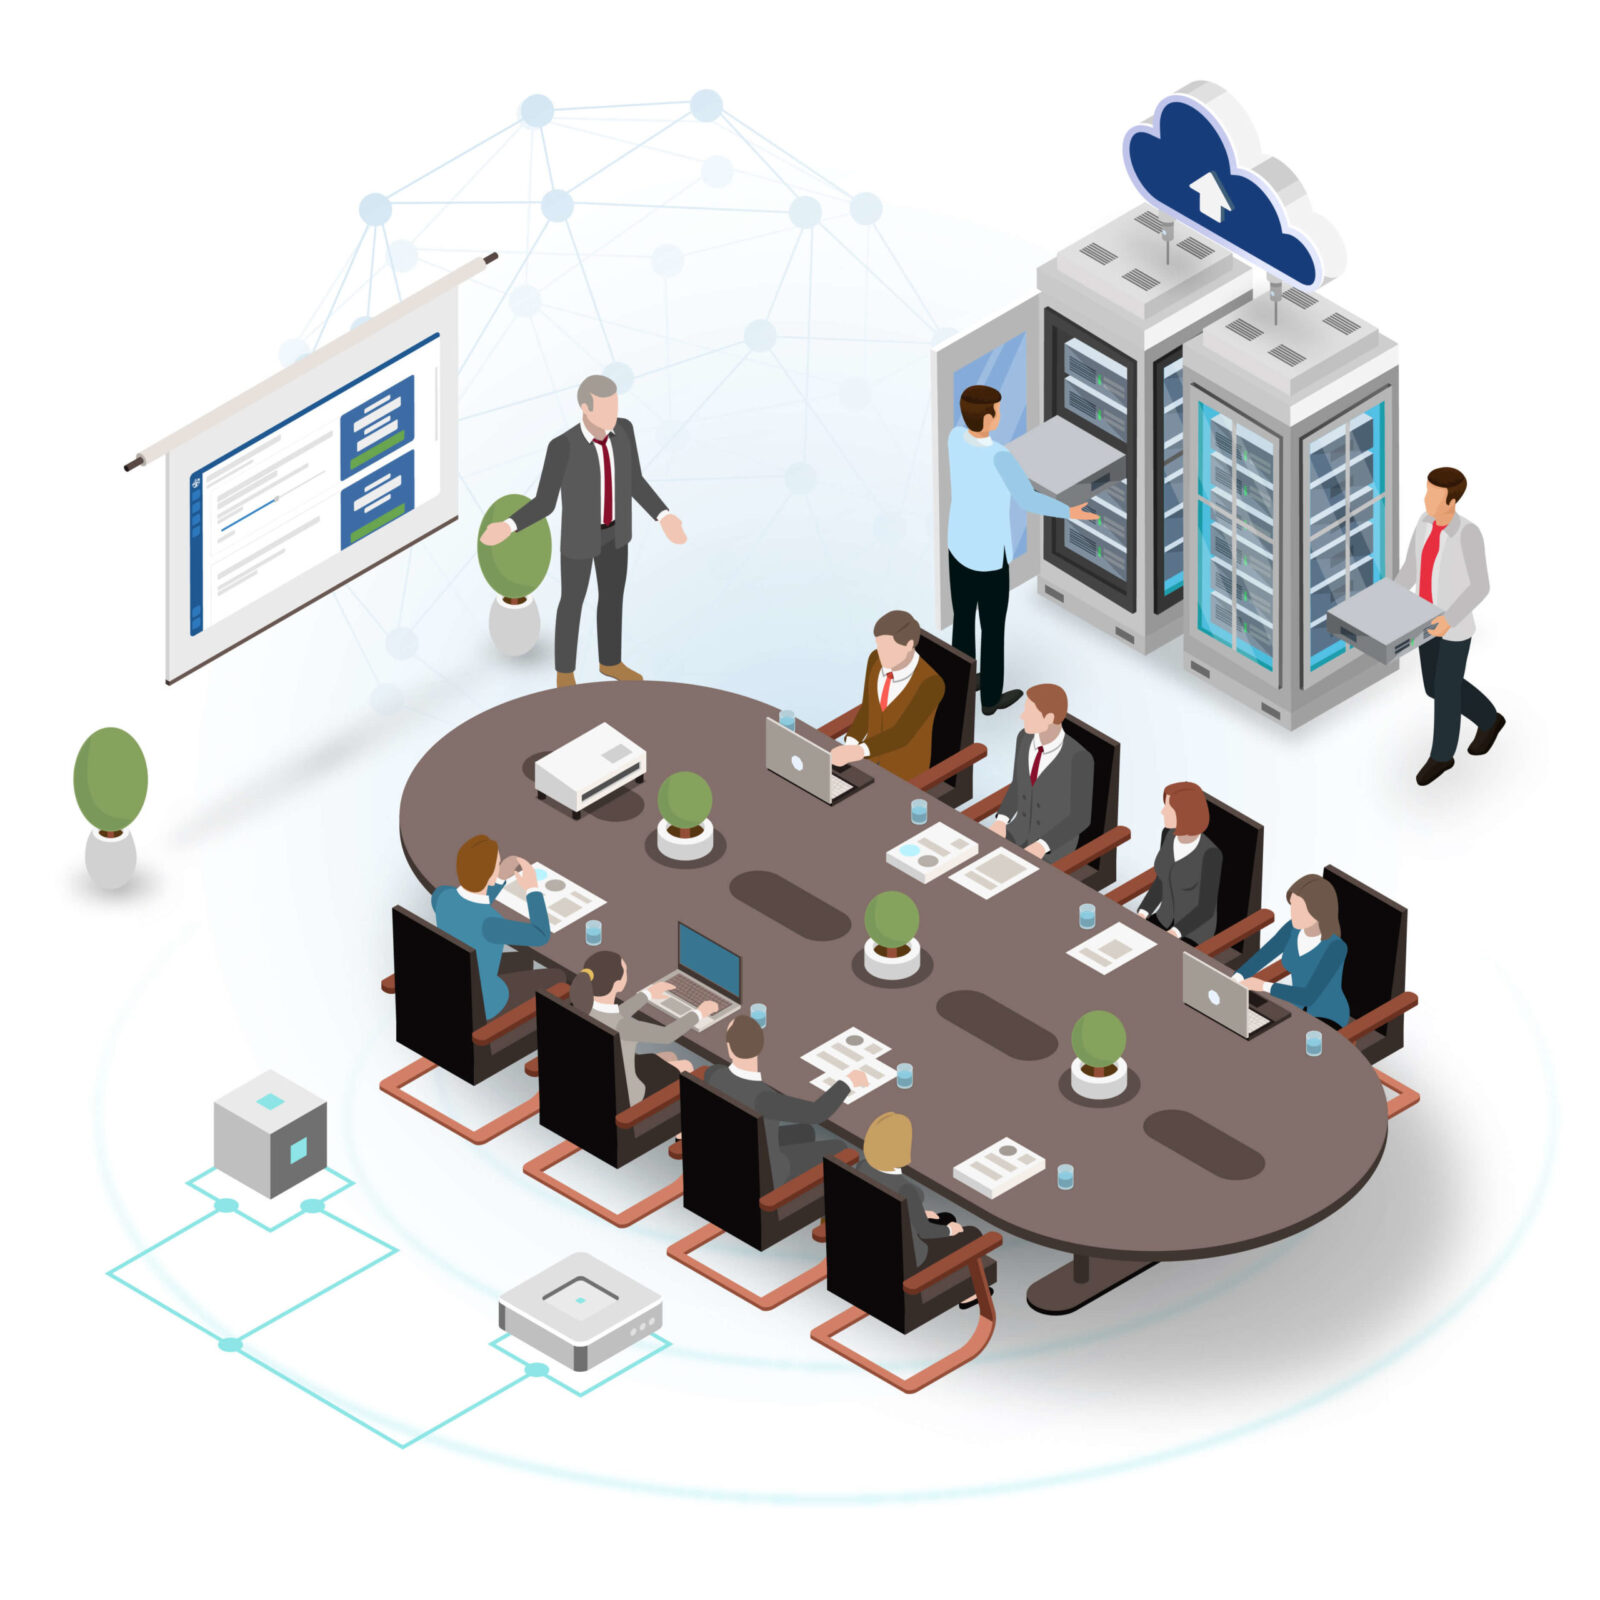 Connectivity in the boardroom